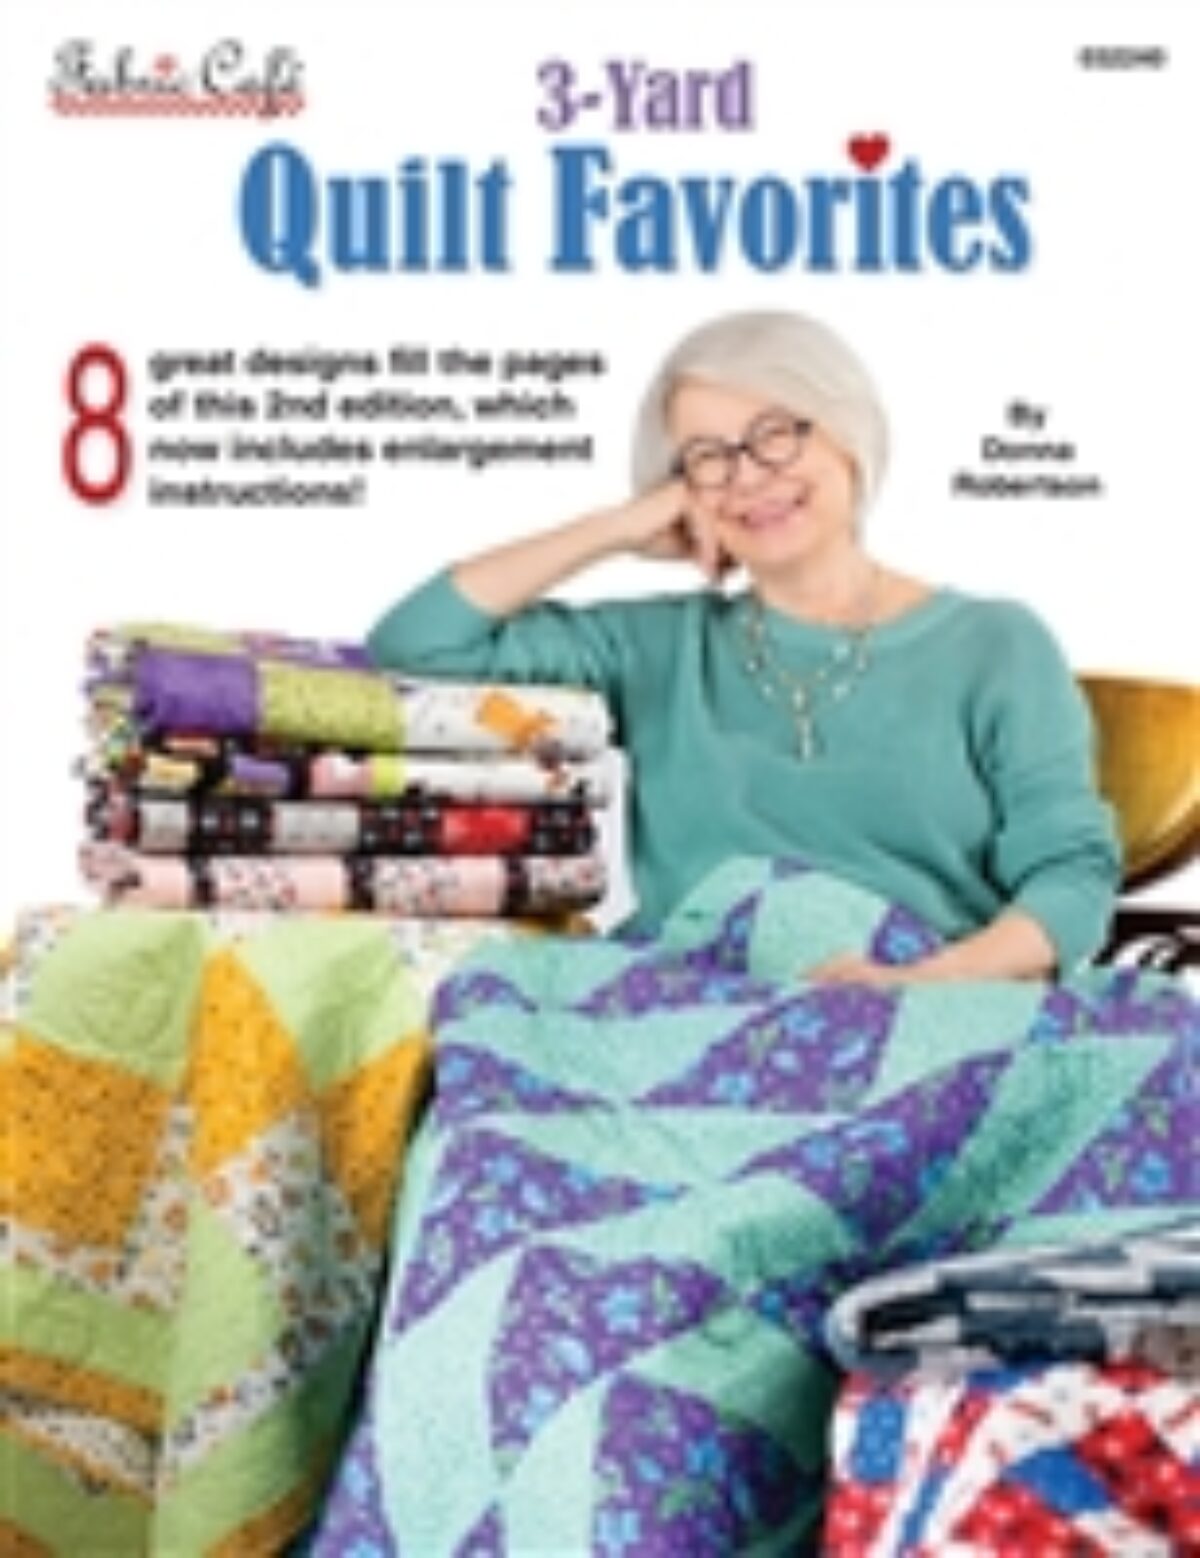 National Nonwovens – Quilting Books Patterns and Notions